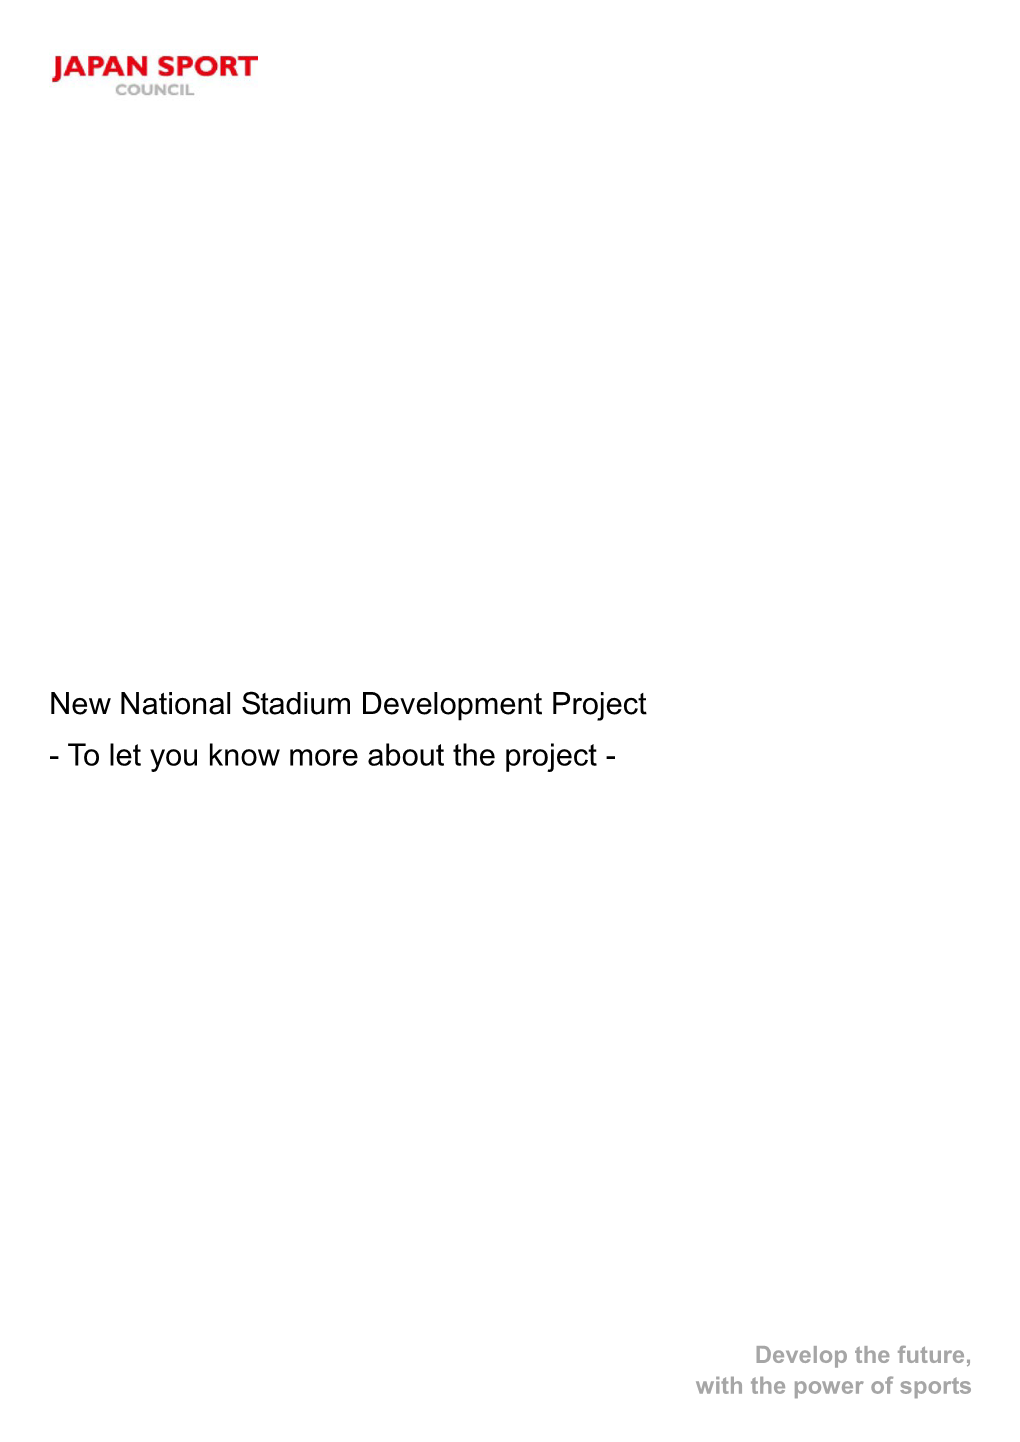 New National Stadium Development Project - to Let You Know More About the Project